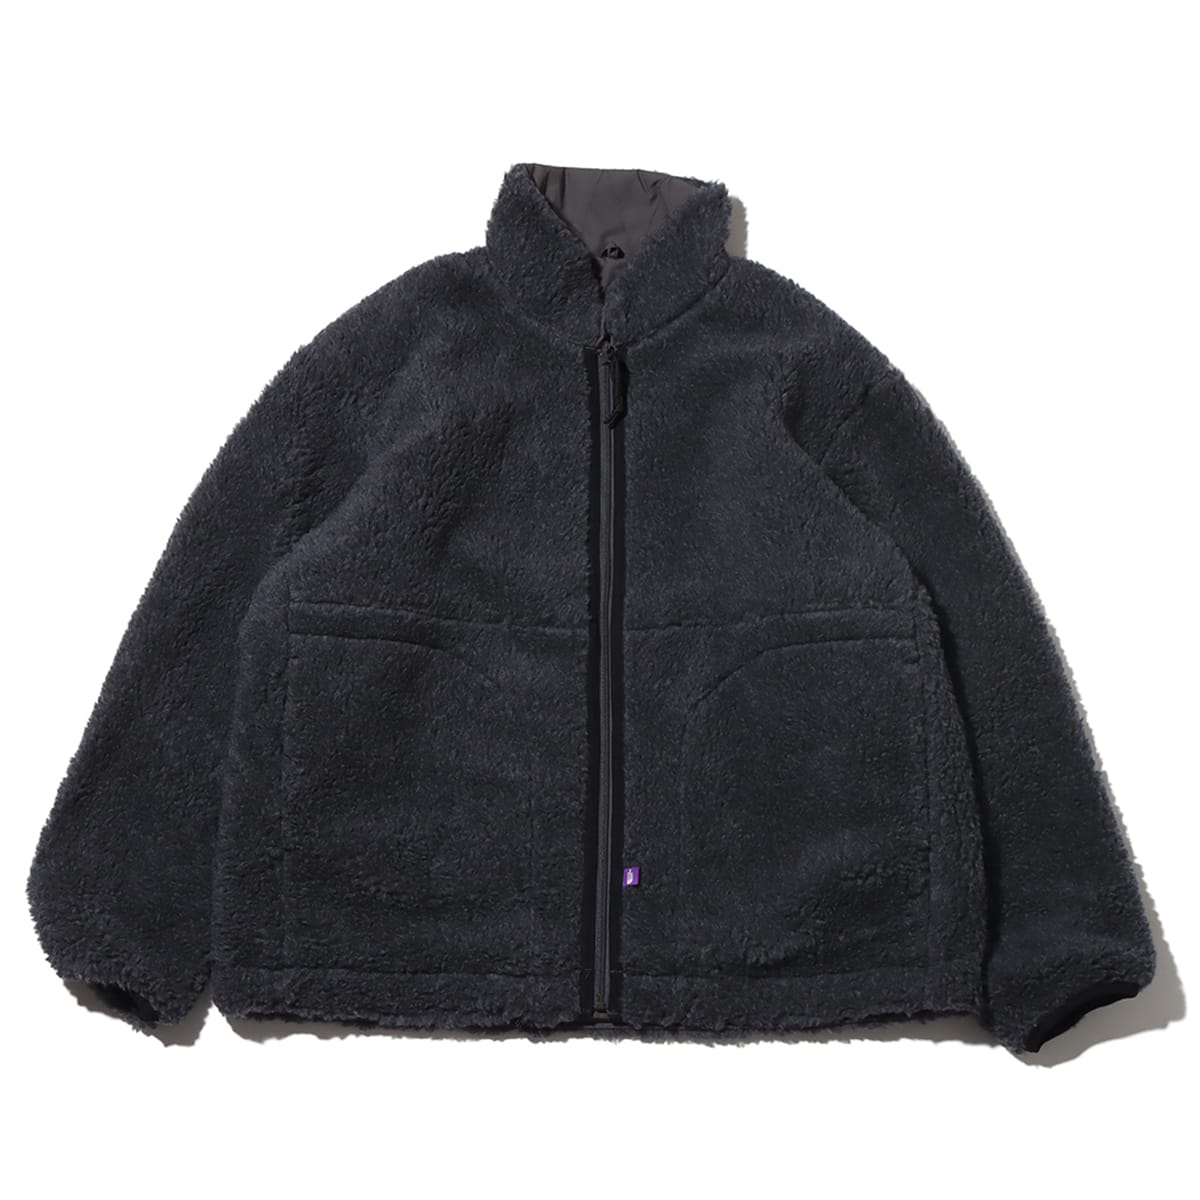 THE NORTH FACE PURPLE LABEL Wool Boa Field Reversible Jacket Mix